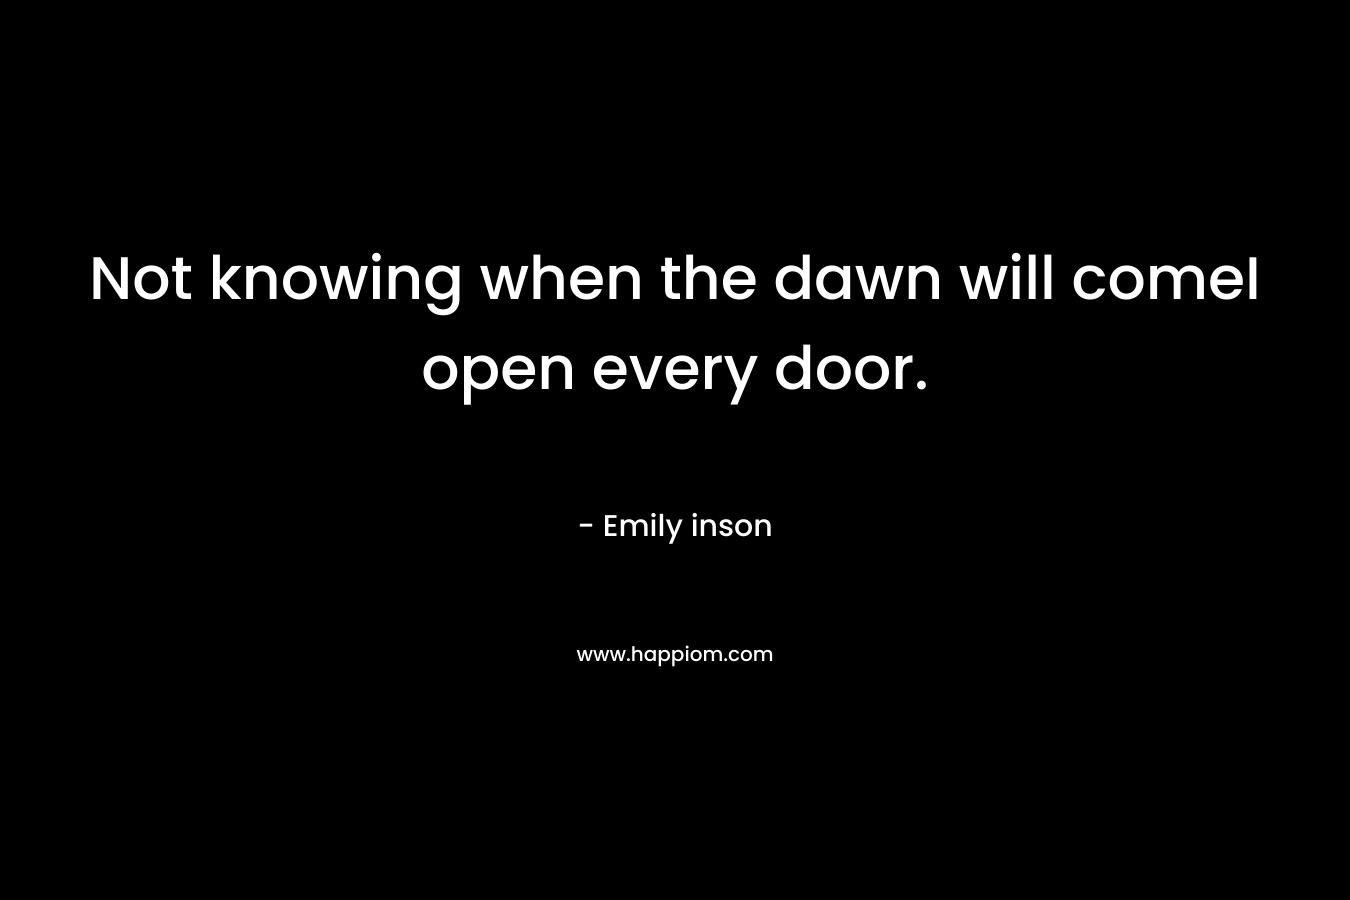 Not knowing when the dawn will comeI open every door. – Emily inson